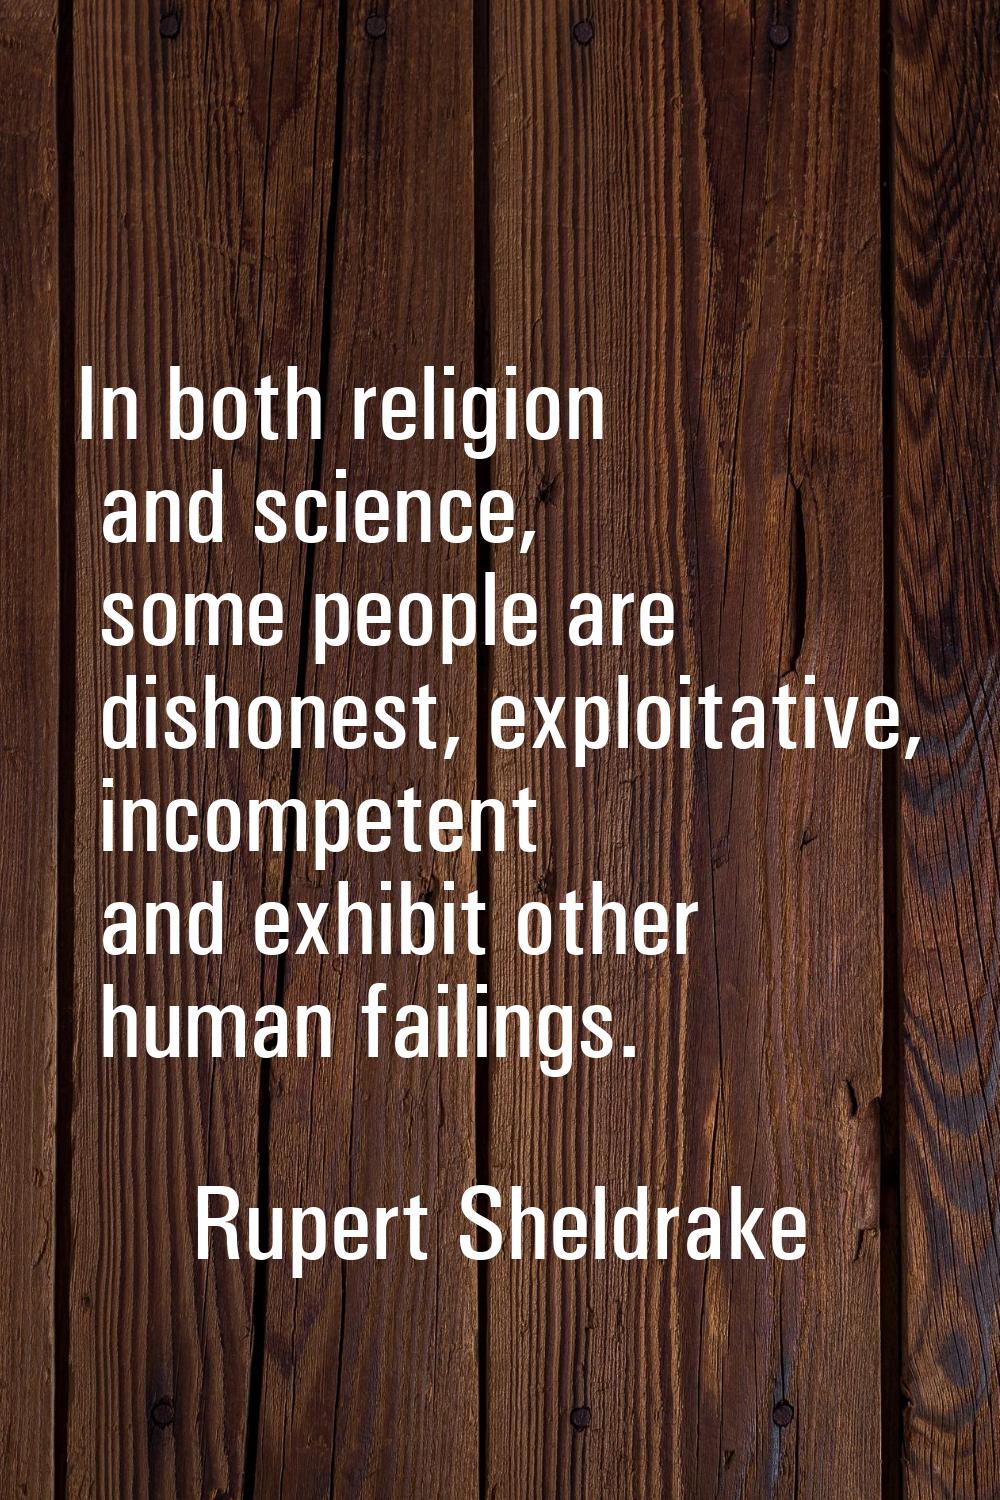 In both religion and science, some people are dishonest, exploitative, incompetent and exhibit othe